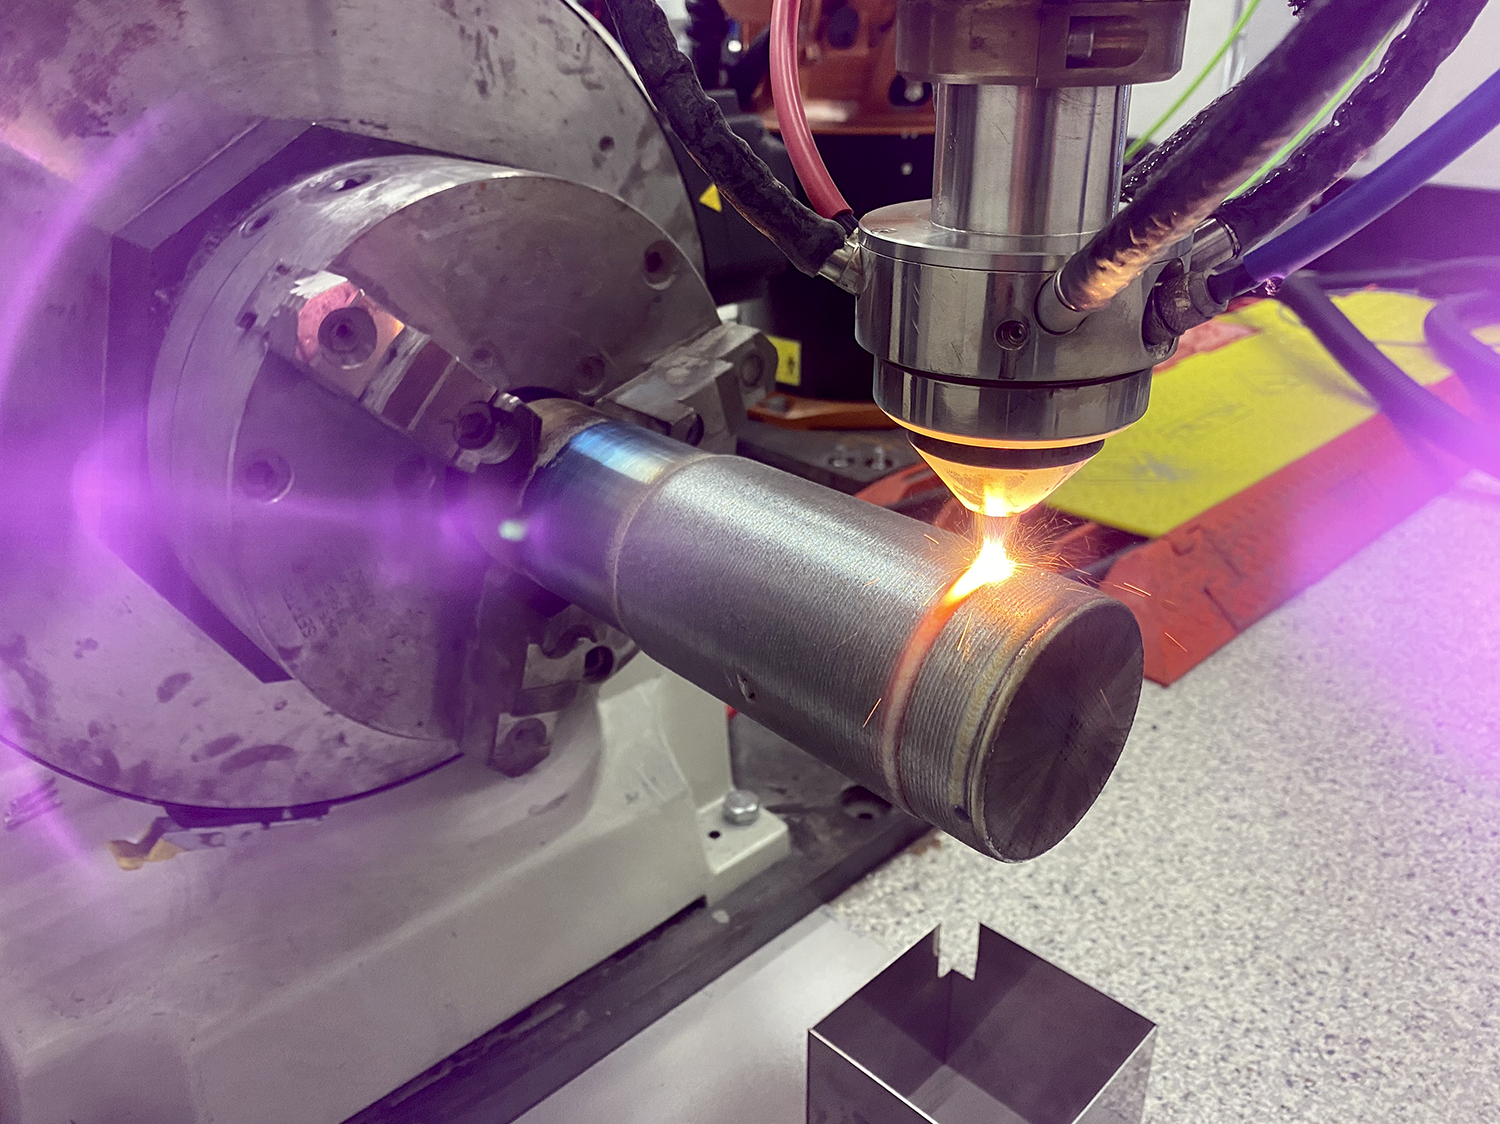 Laser metal deposition offers many advantages over conventional weld repairs